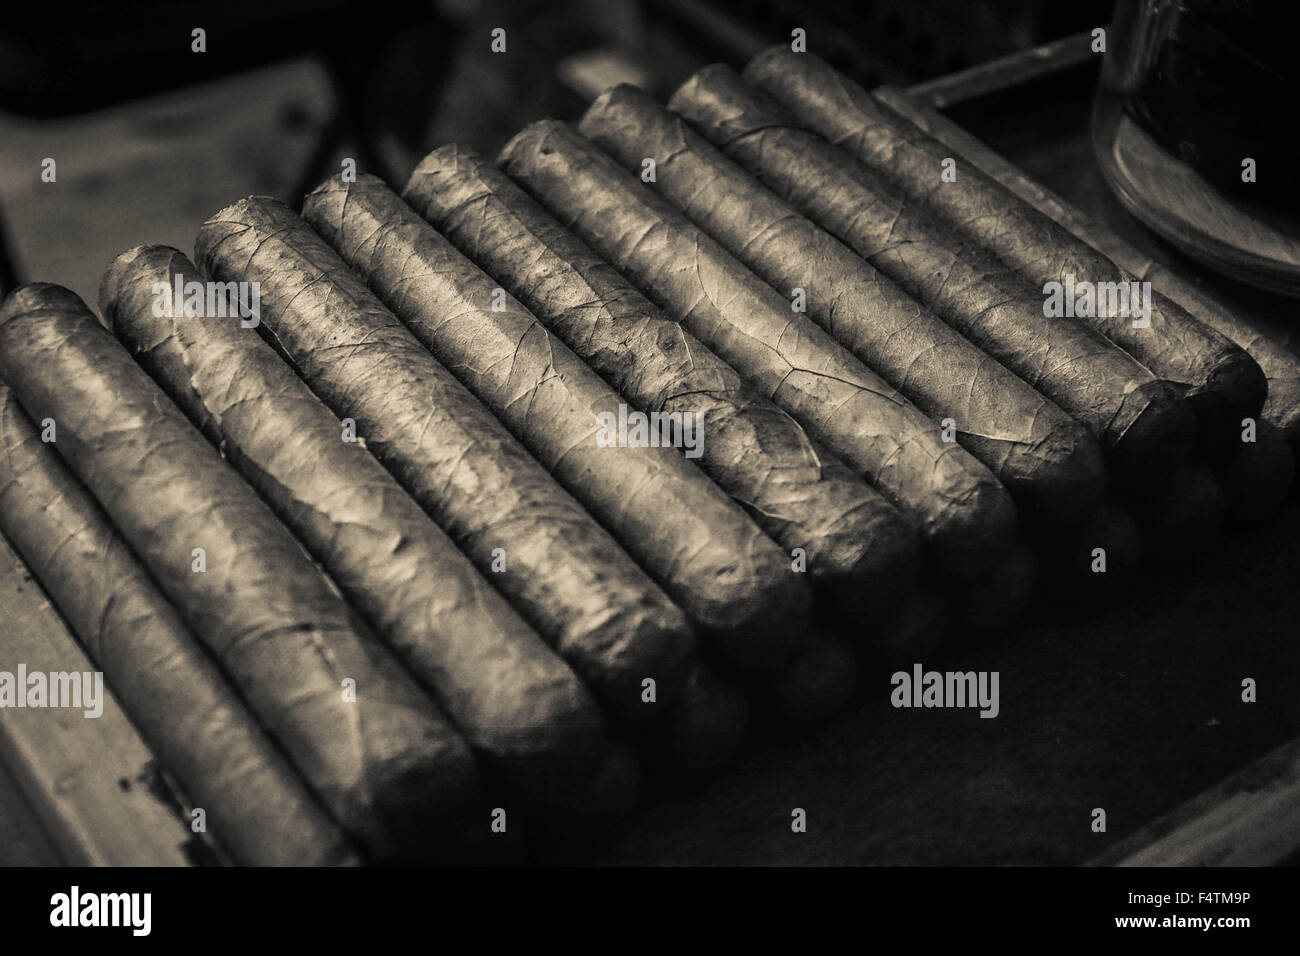 Moody, artistic and nostalgic view of Hand rolled Cuban cigars stacked in cigar factory work bench area Stock Photo